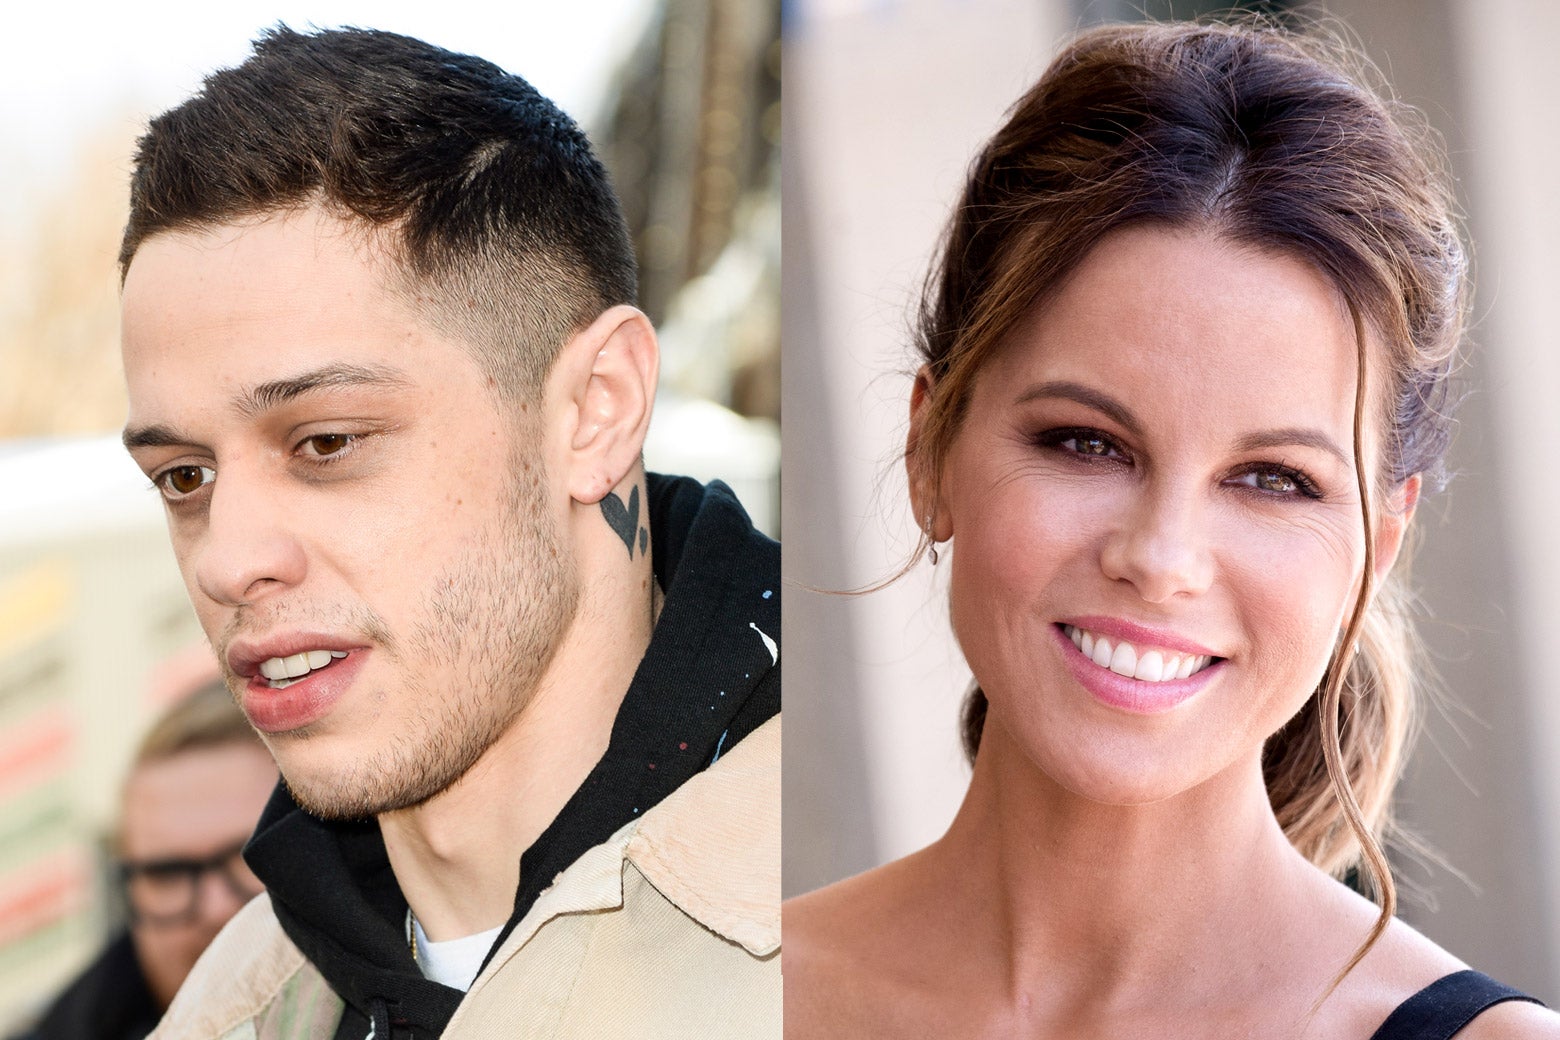 Pete Davidson discussed his relationship and age gap with Kate Beckinsale Saturday Night Live, but the reaction hasn't been sexist.